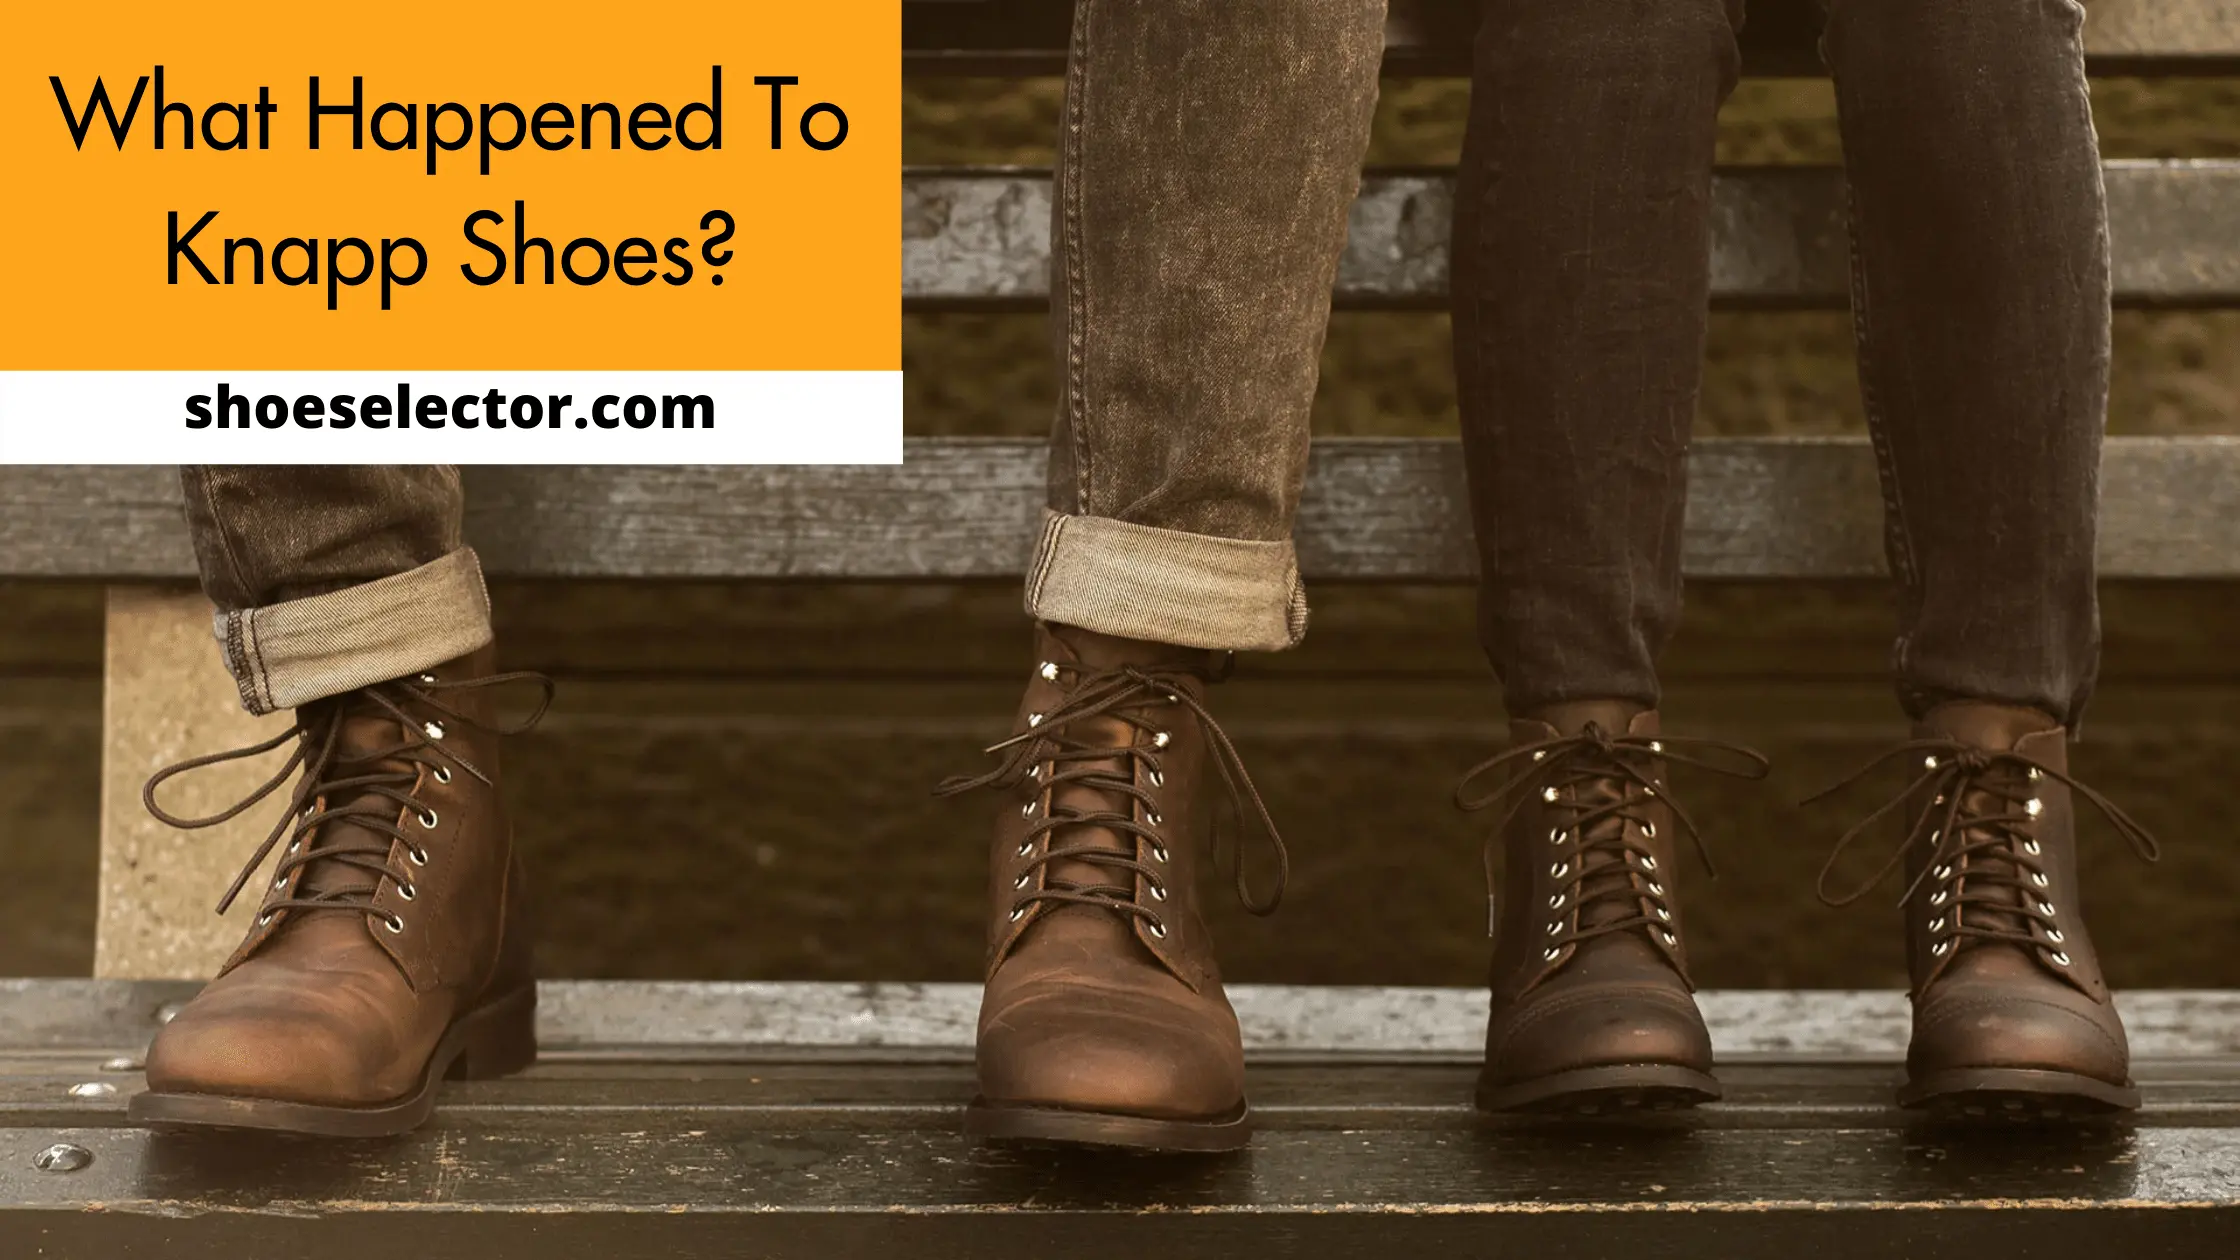 What Happened to Knapp Shoes? - Easy Guide